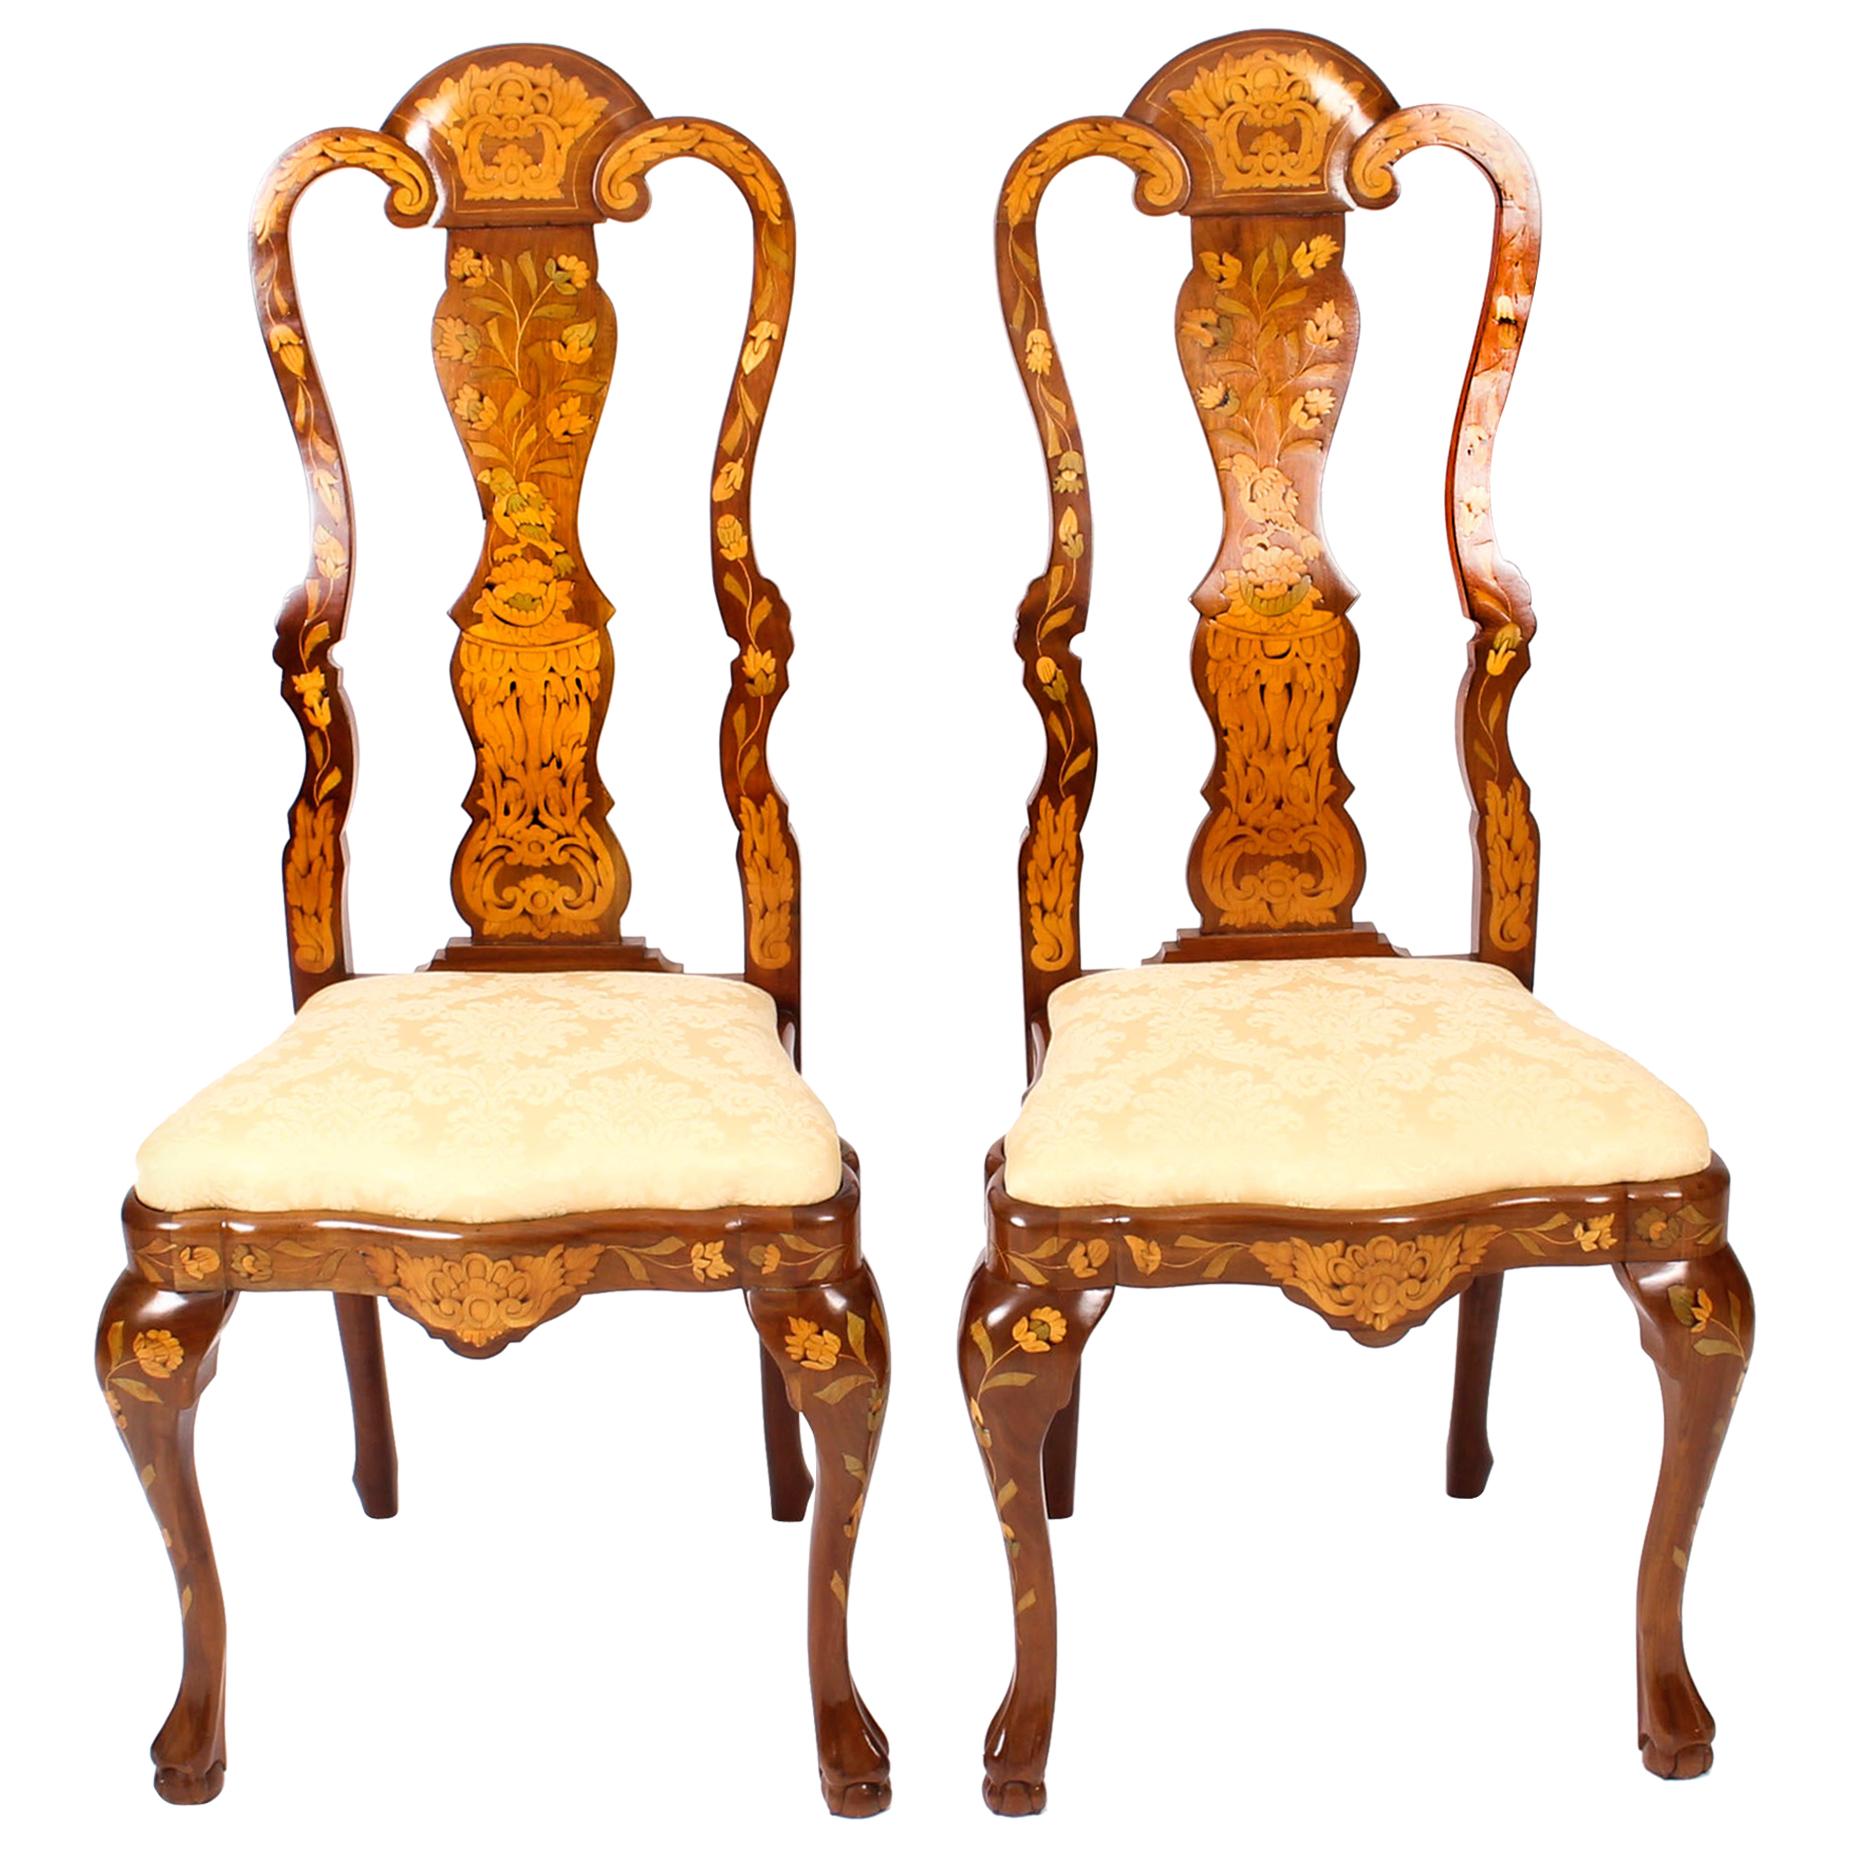 Antique Pair of Dutch Floral Marquetry Walnut Dining Chairs Late 18th Century